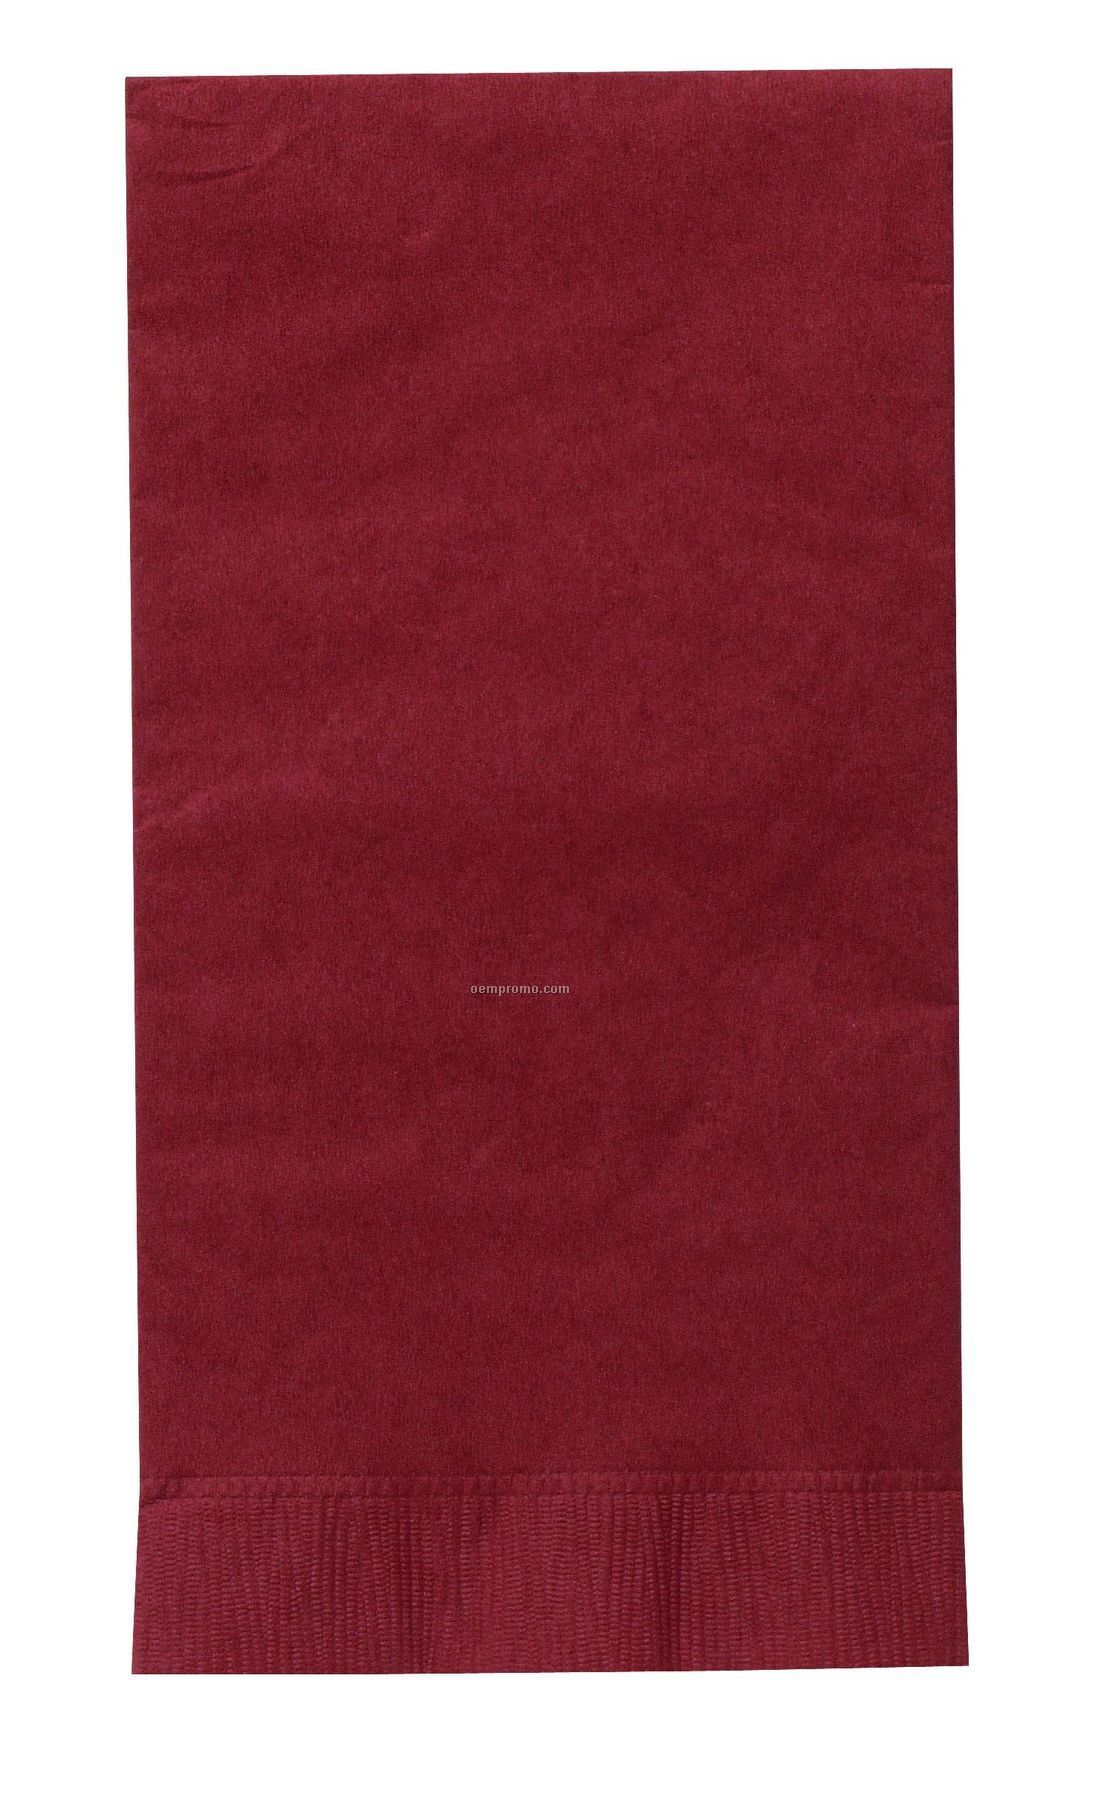 Colorware Burgundy Royale Red Dinner Napkins With 1/8 Fold